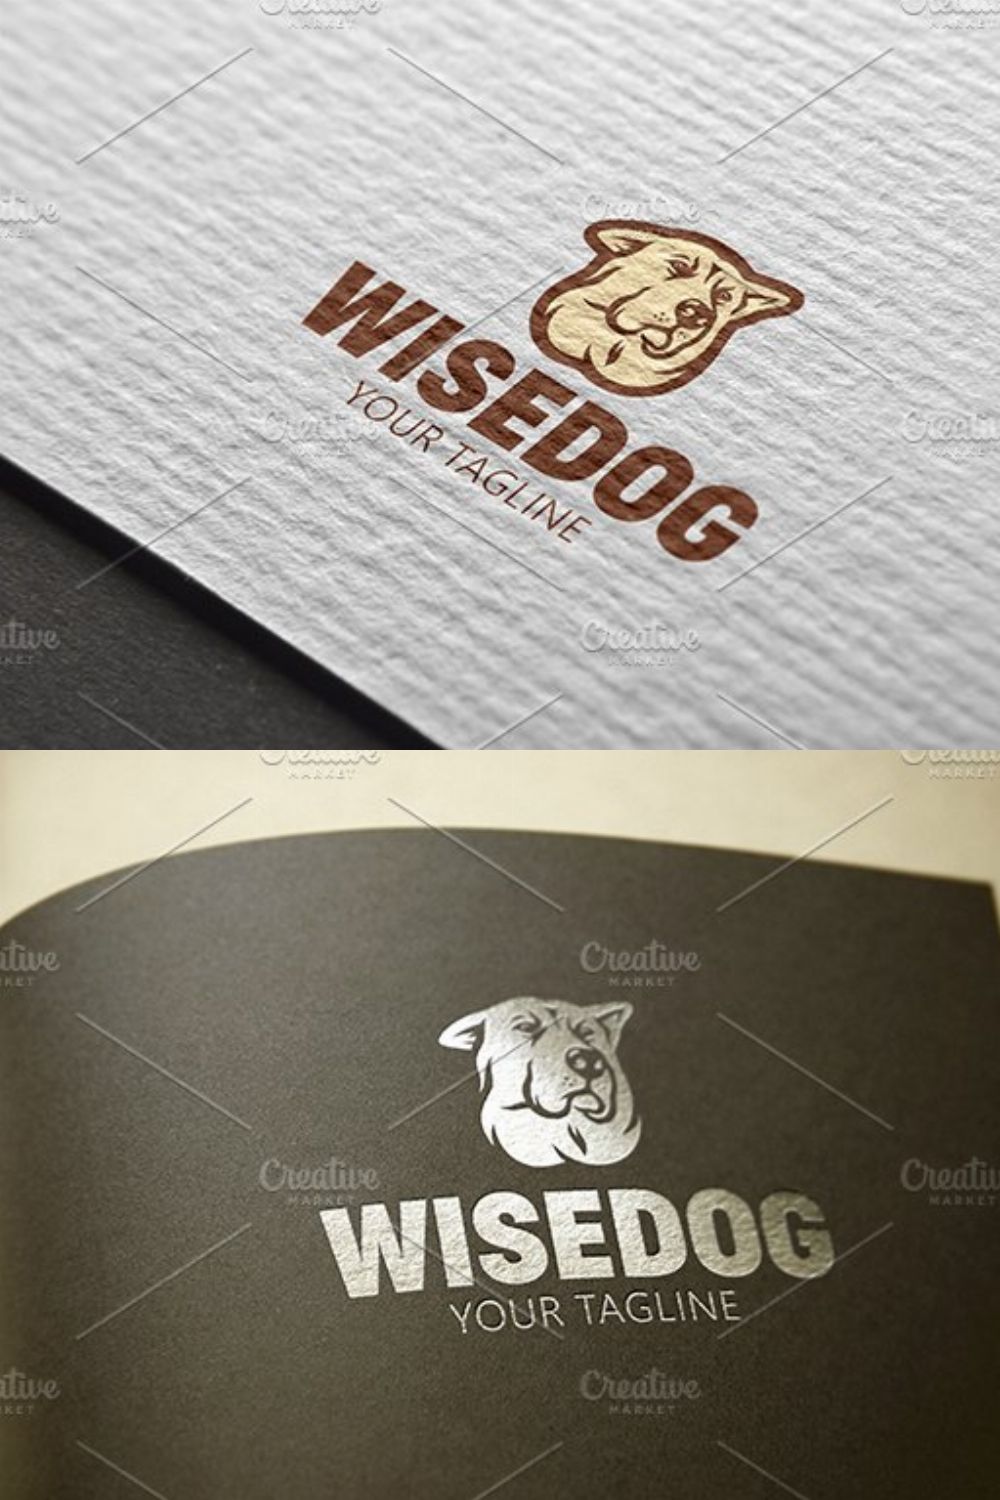 Wise Dog pinterest preview image.